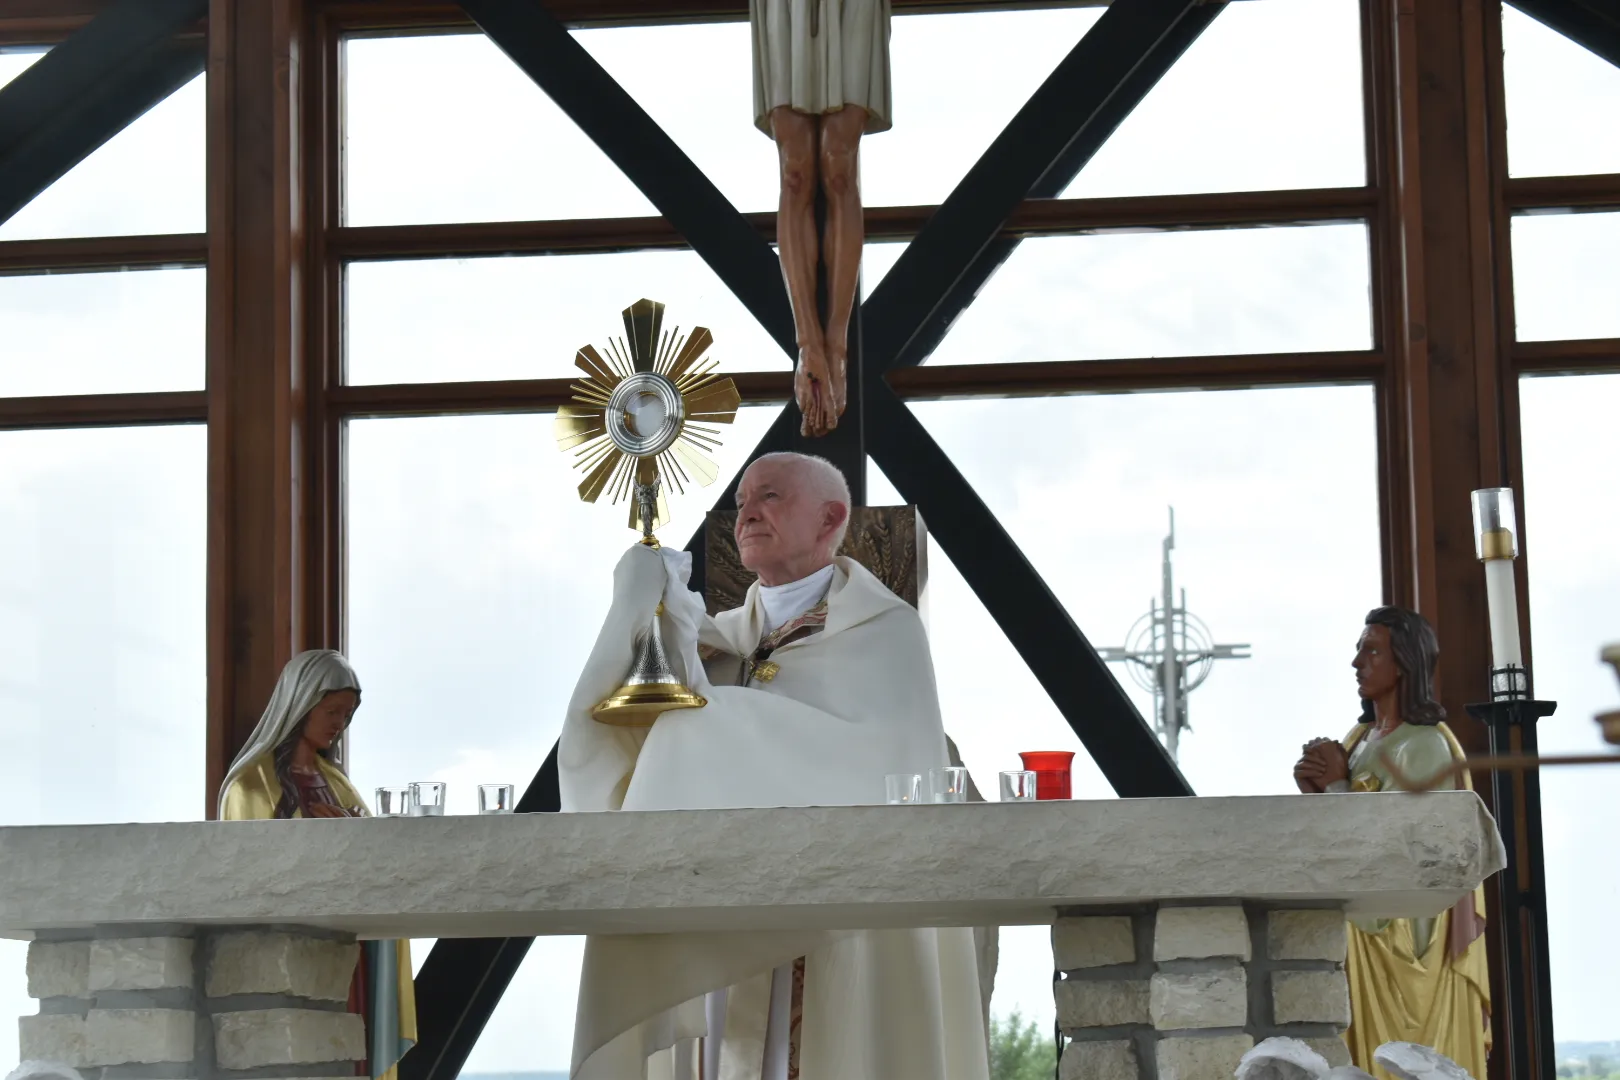 Archbishop George Lucas of Omaha raises the monstrance in Benediction at the Holy Family Shrine on June 21, 2024. Credit: Kate Quiñones/CNA